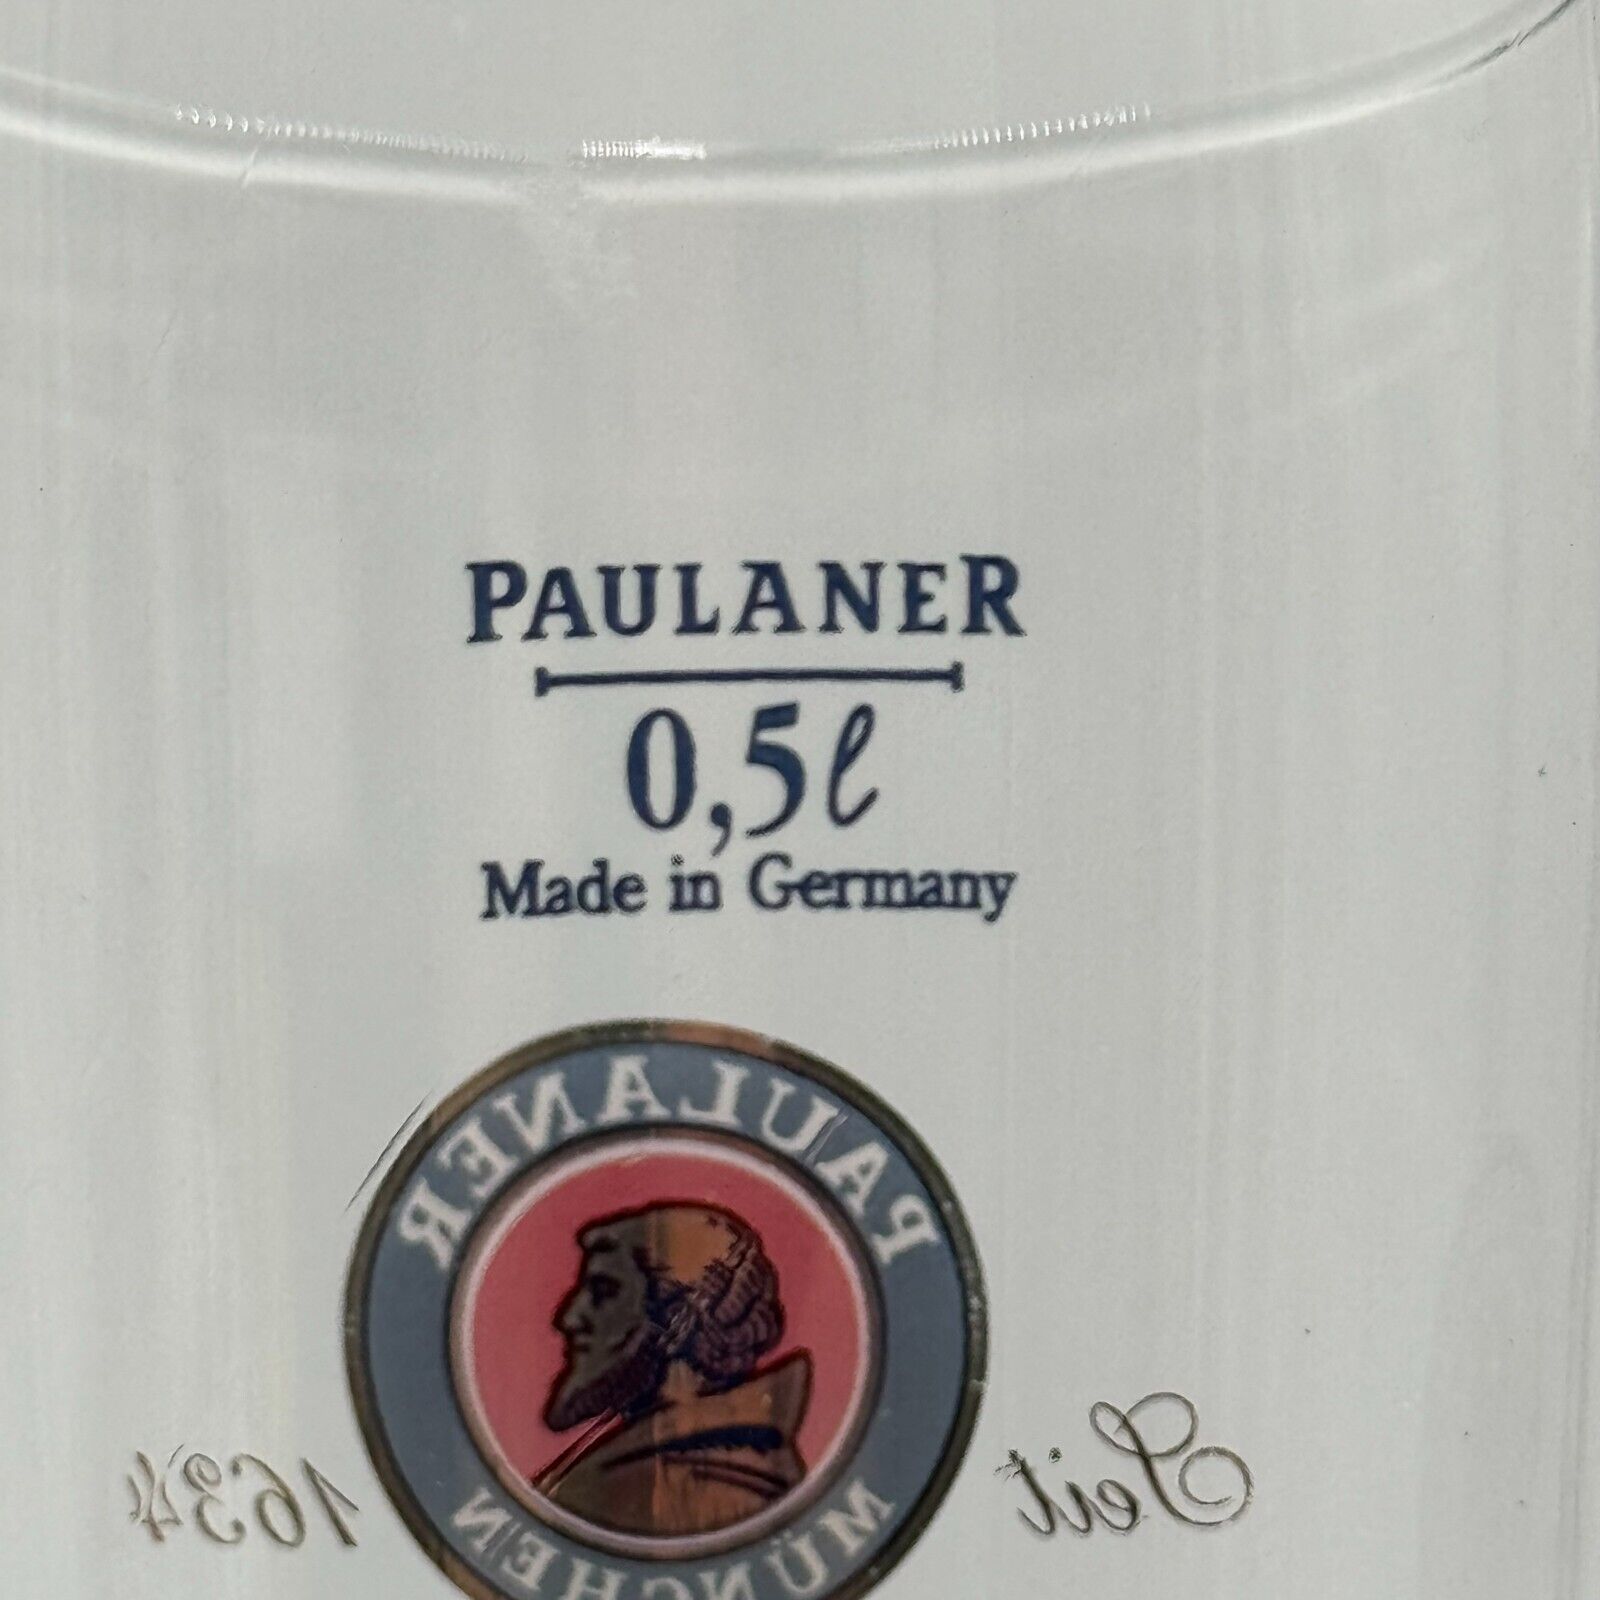 Paulaner Munchen .5 Liter Glass Tall Beer Mug made by SOHM Germany Limited